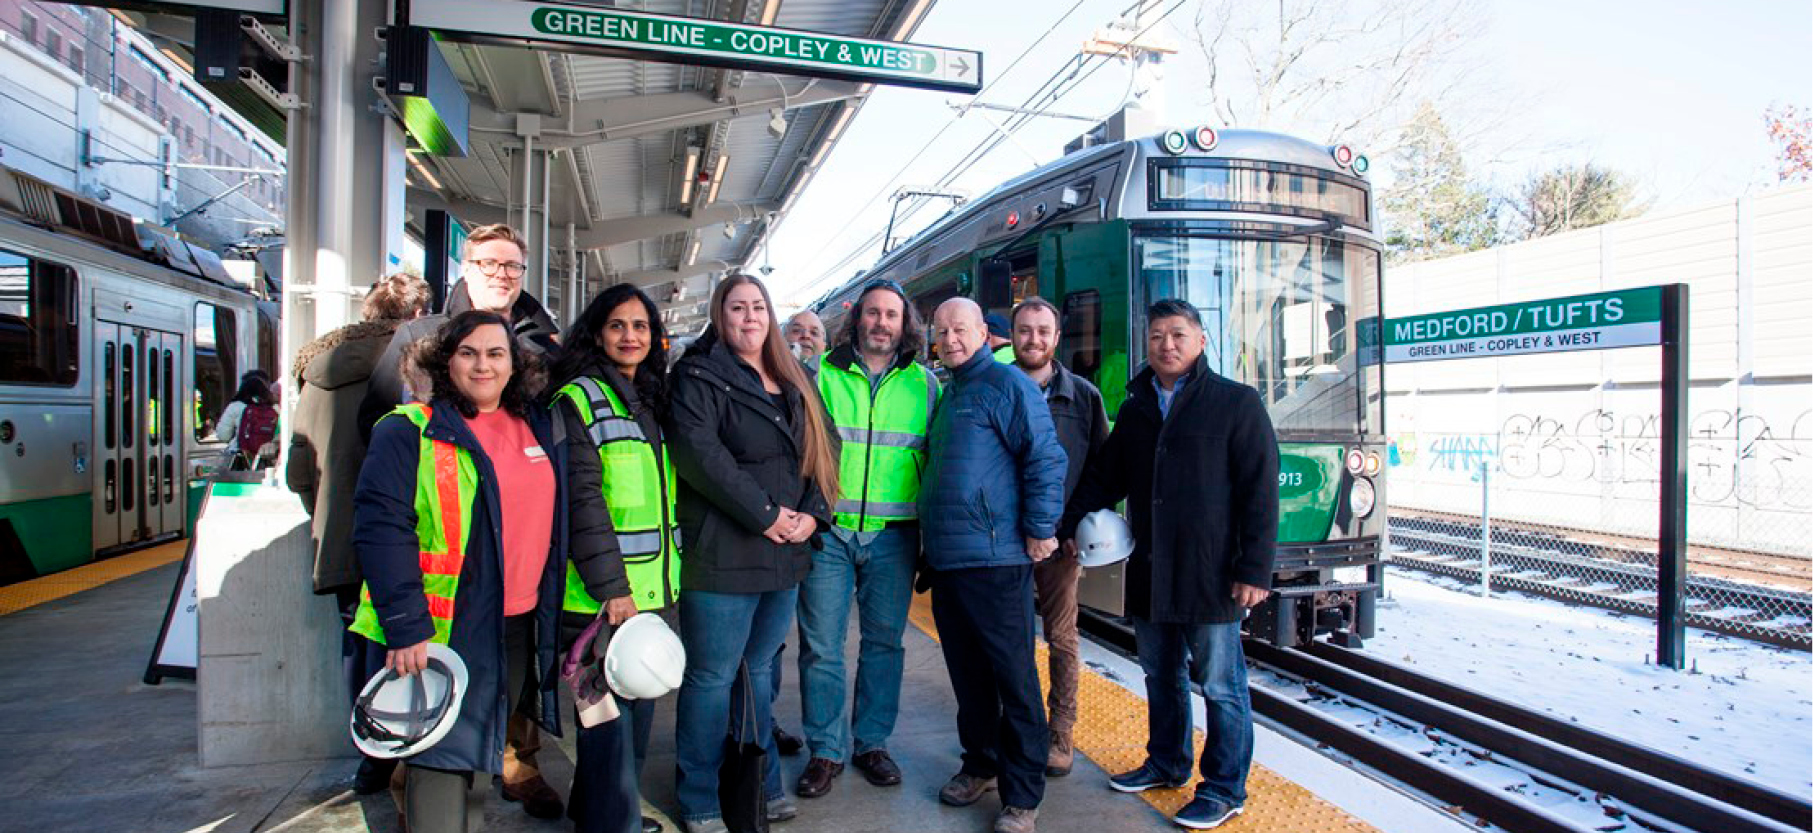 STV staff at the opening of the GLX at the Medford/Tufts terminus